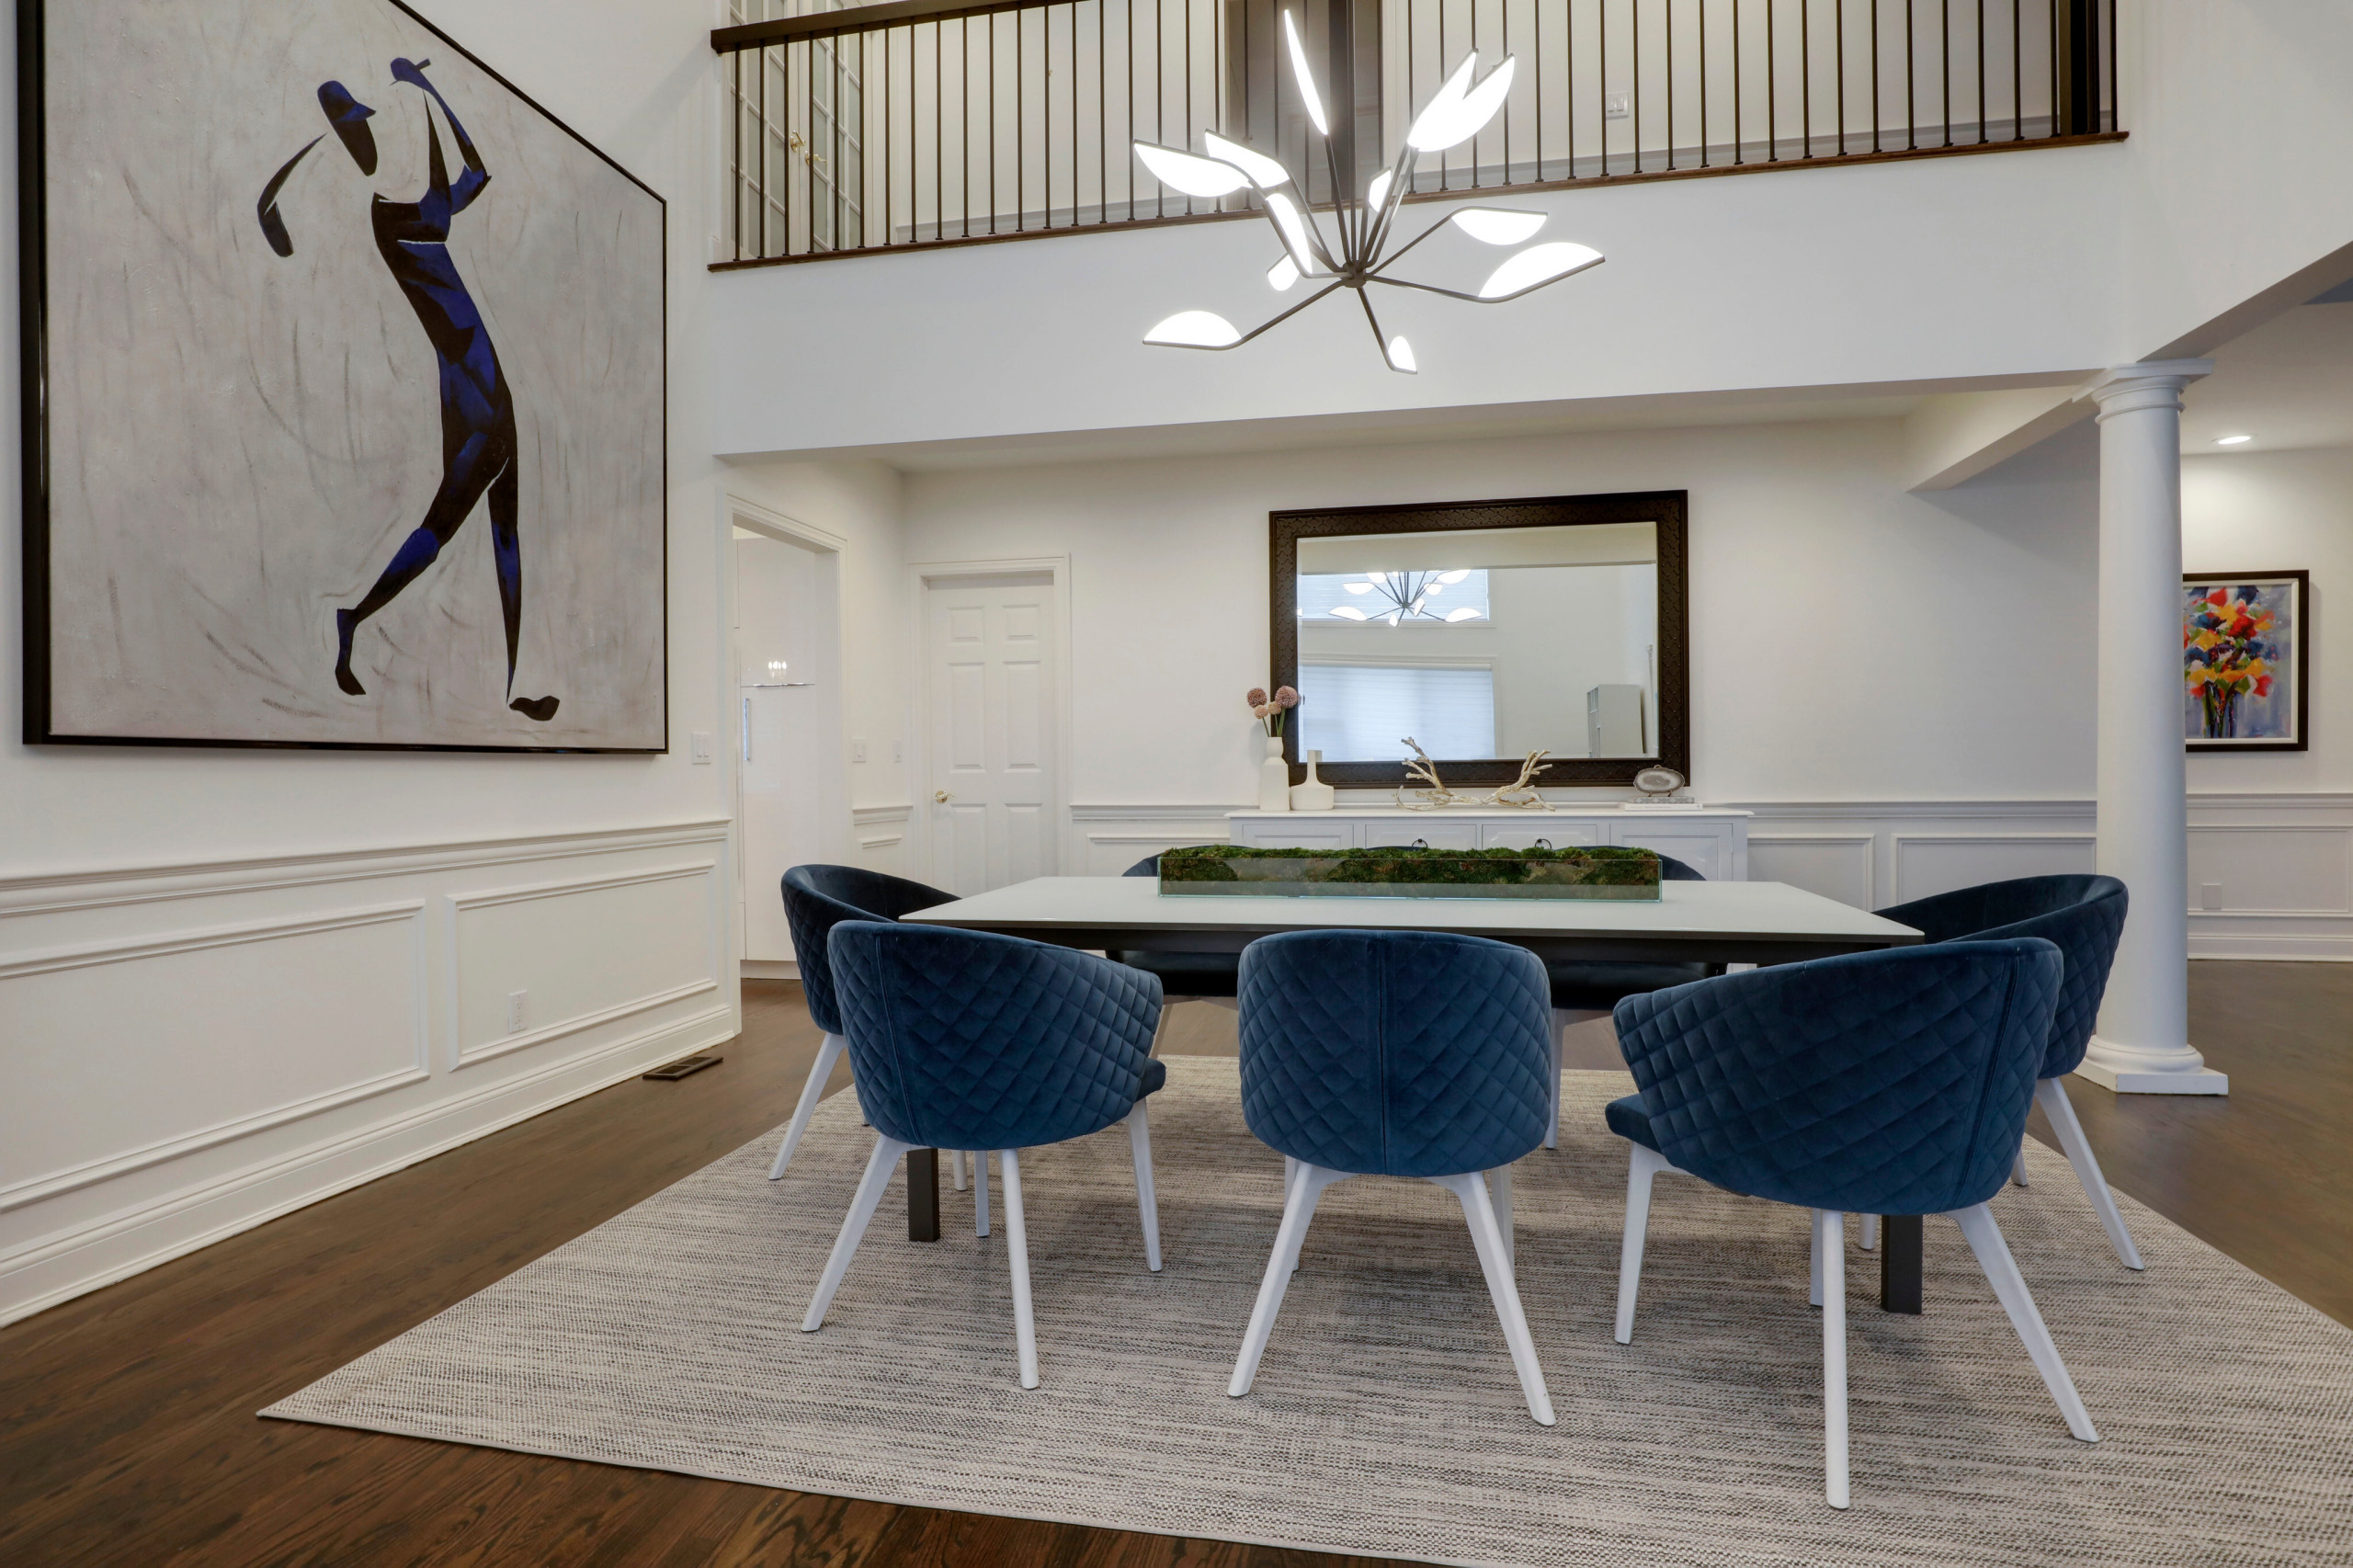 The geometric bright chandelier mimics the club in the large painting adding movement and light to the room. The blue quilted chairs with white legs further mimic the painting with the golfers' legs b